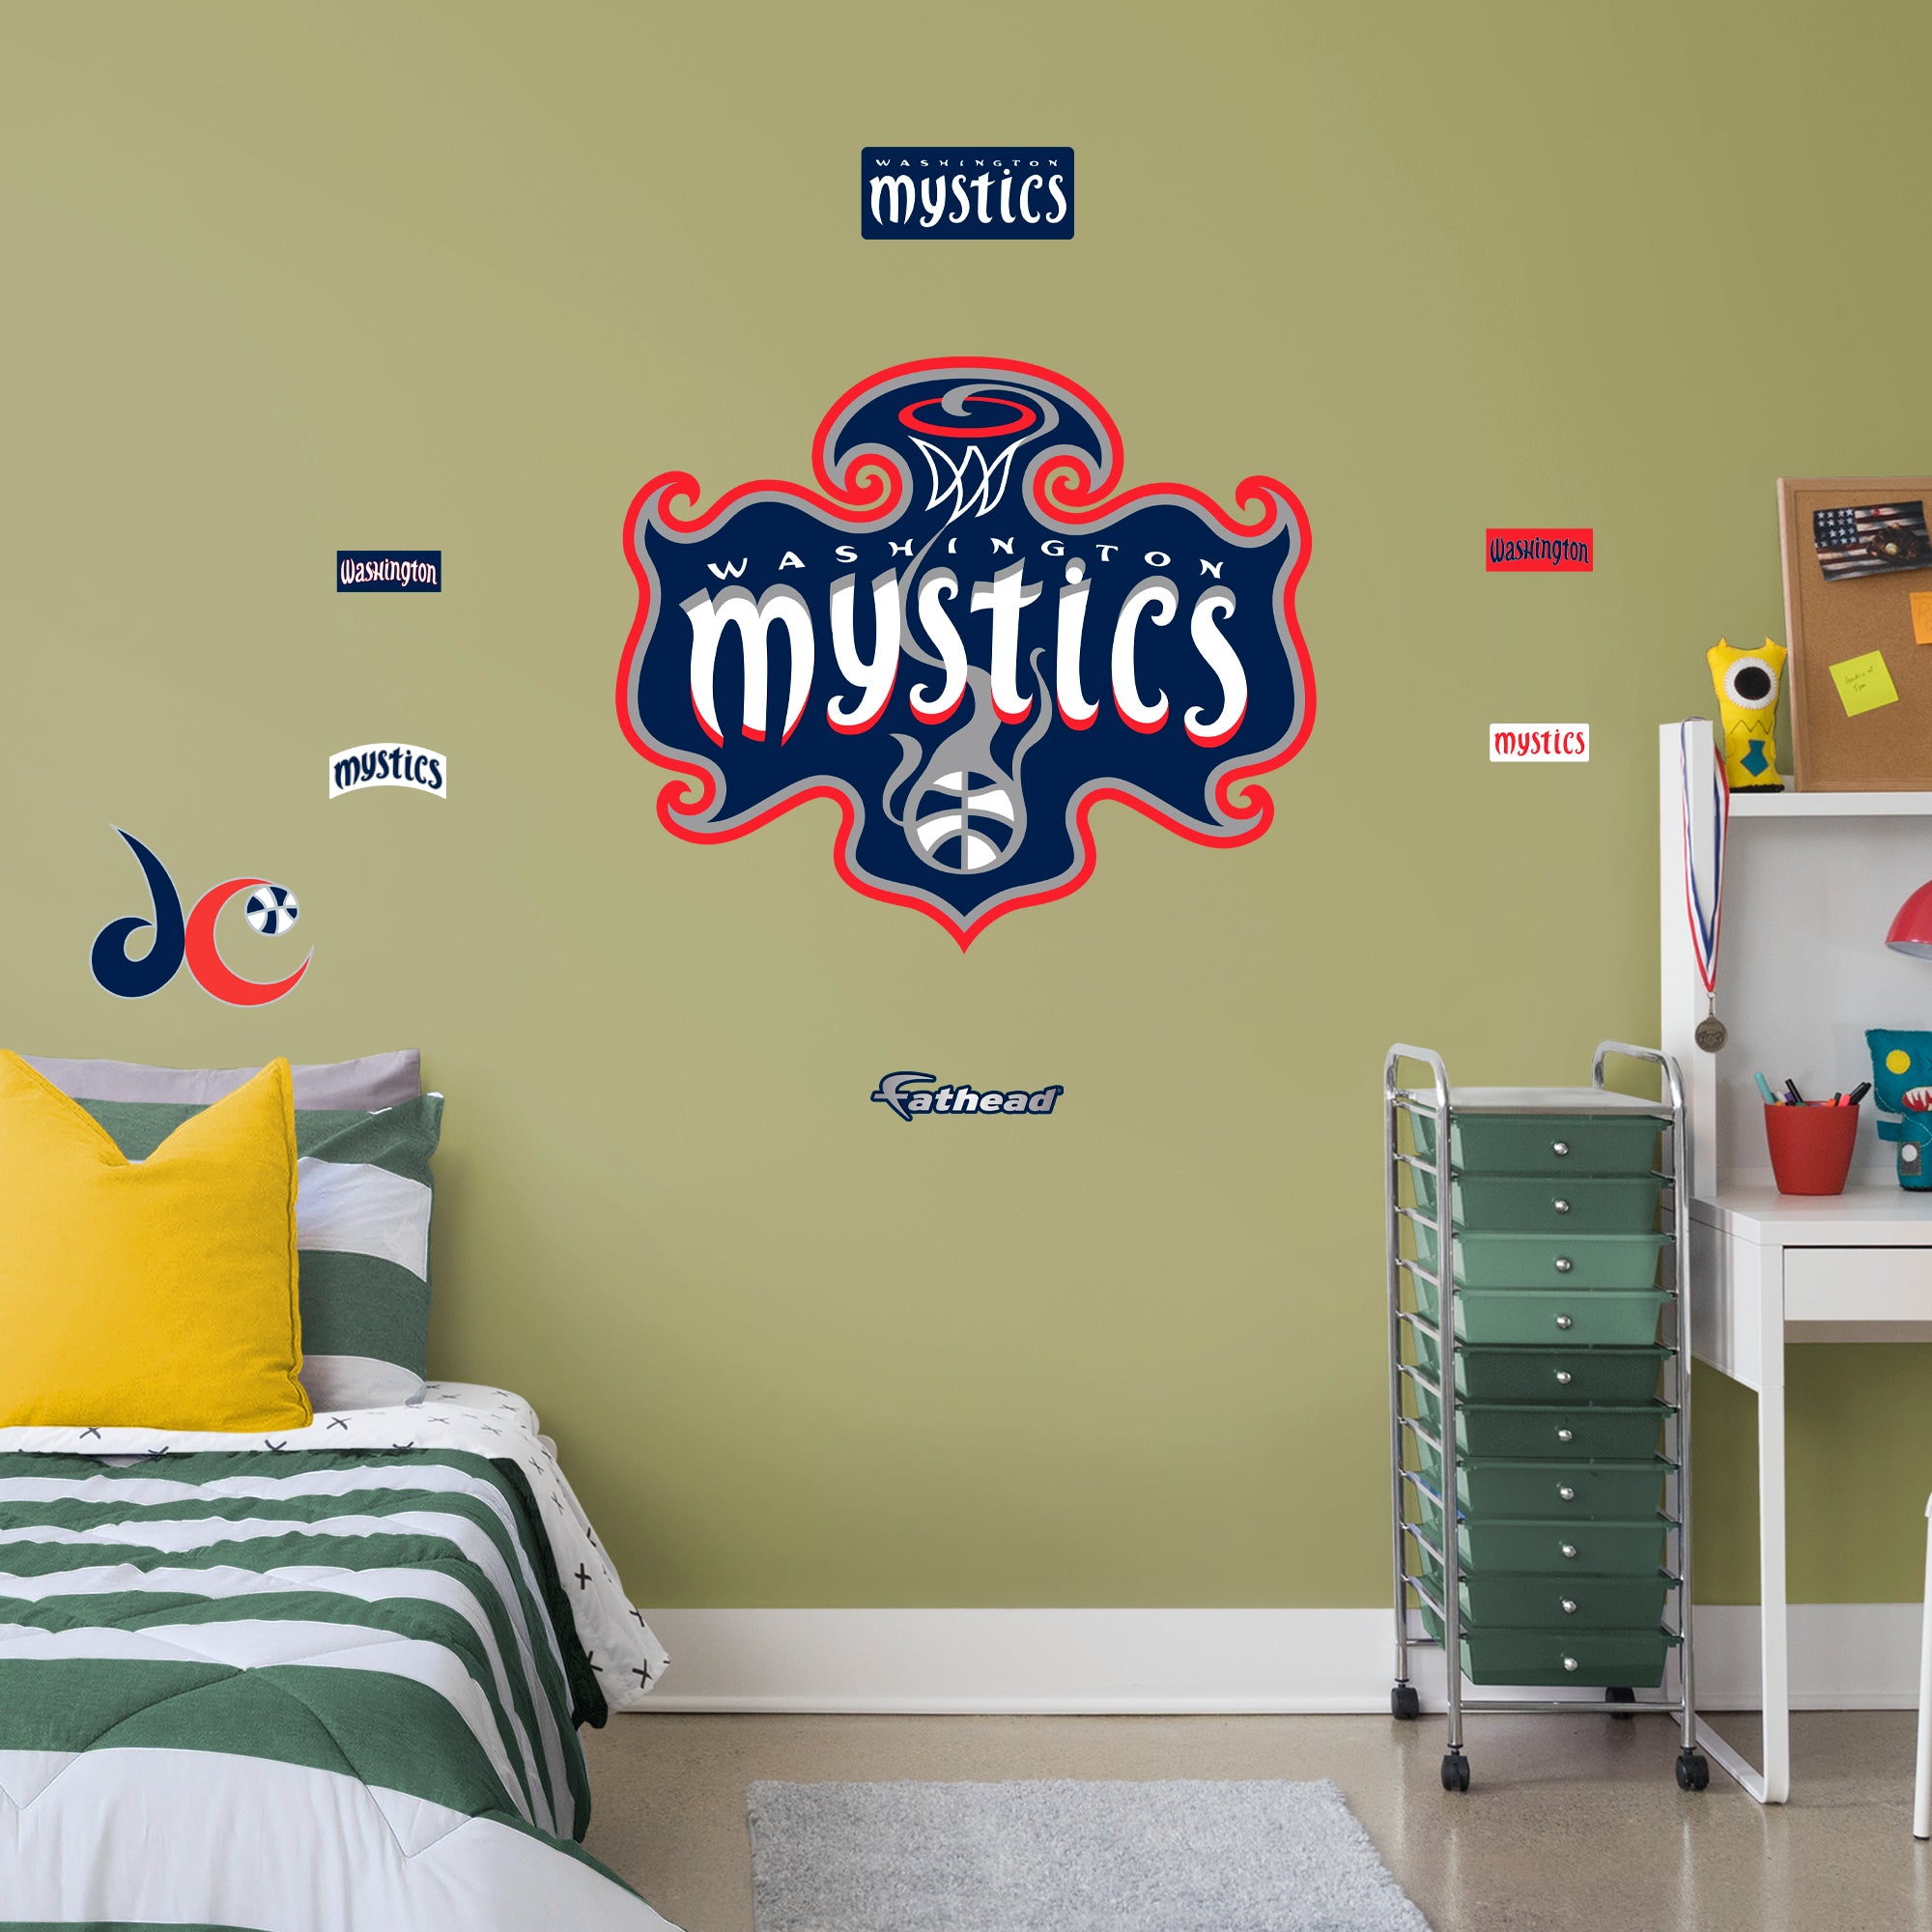 Washington Mystics: Logo - Officially Licensed WNBA Removable Wall Decal Giant + 7 Decals by Fathead | Vinyl